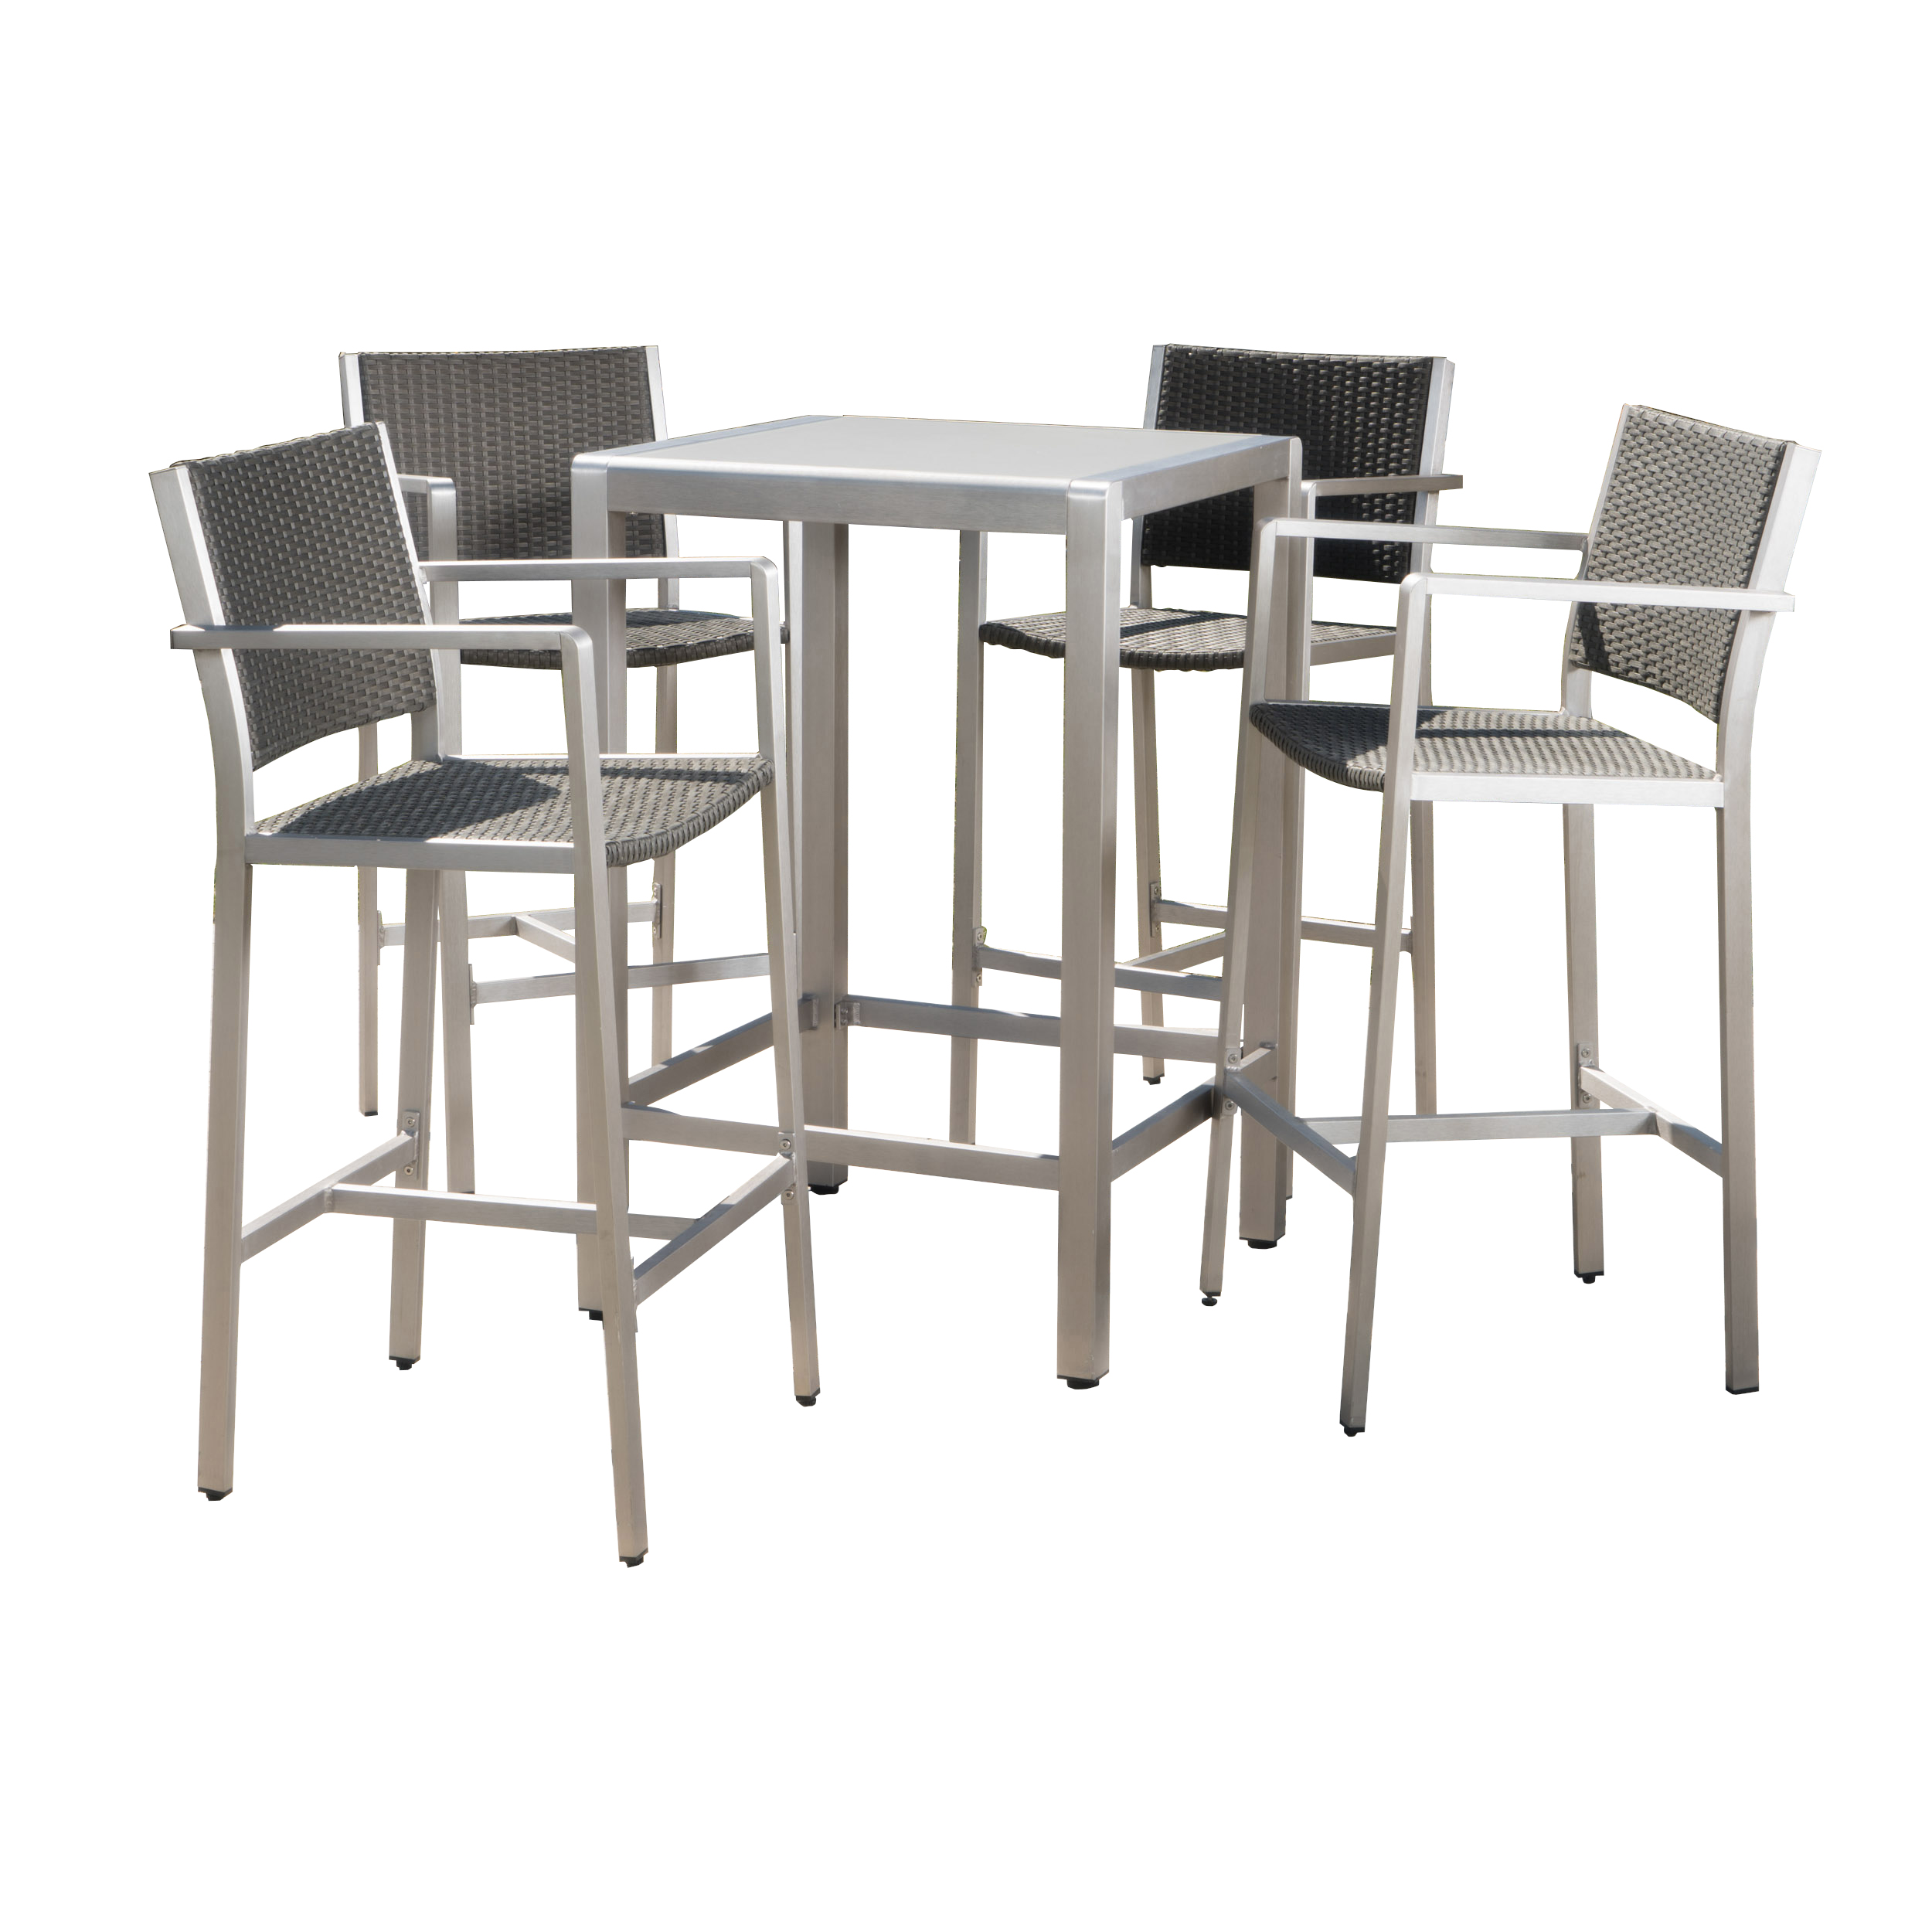 Miller Outdoor 5 Piece Wicker Bar Set with Glass Table Top, Grey - image 2 of 10